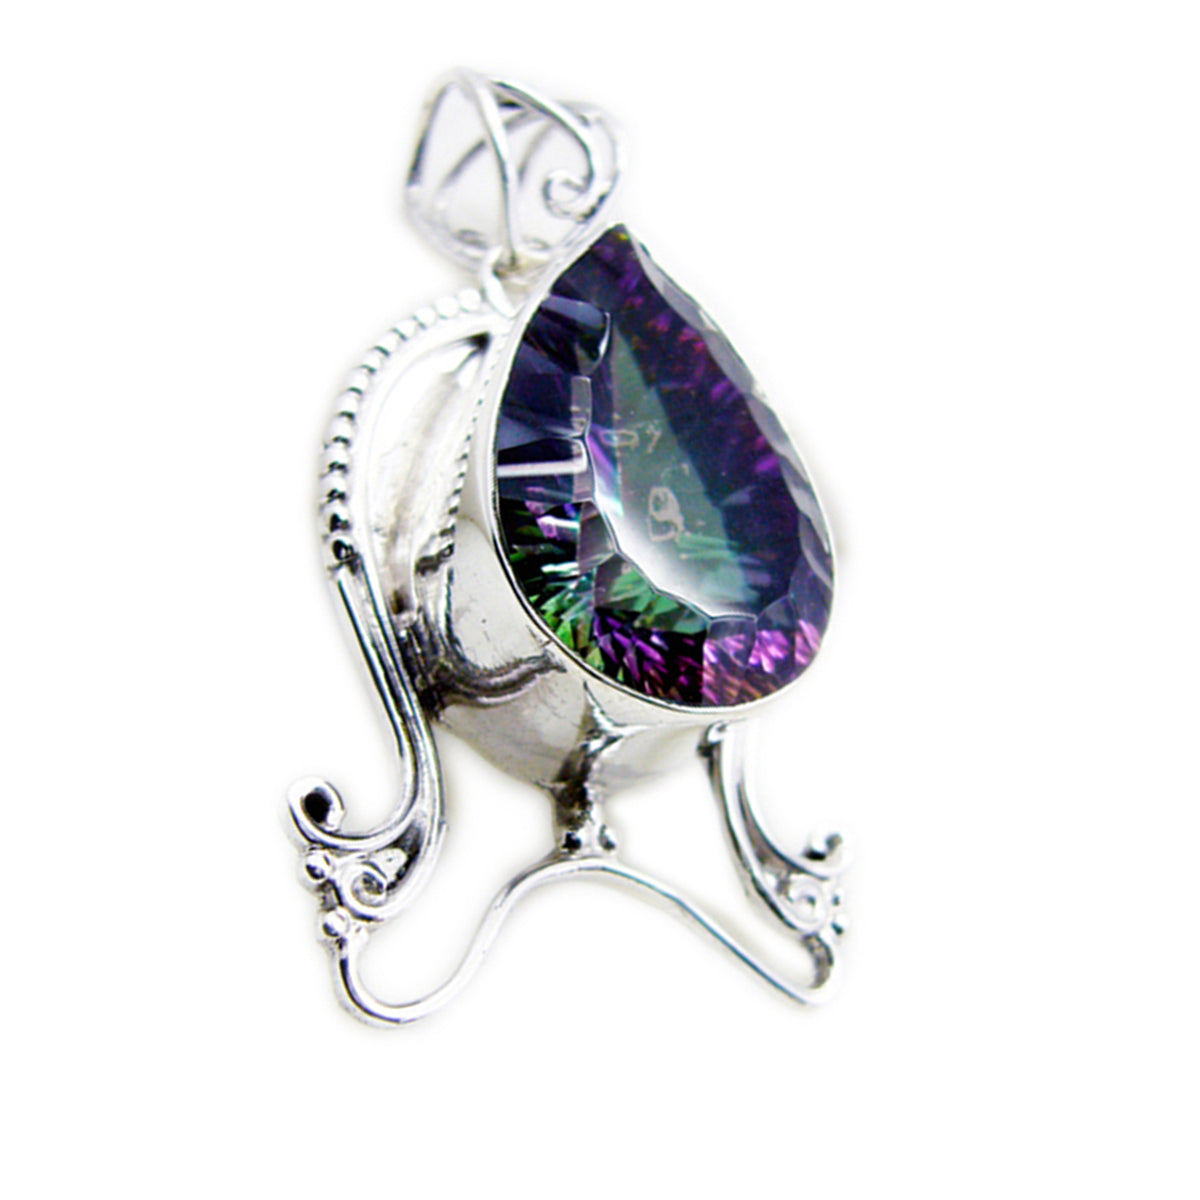 Riyo Comely Gems Pear Faceted Multi Color Mystic Quartz Solid Silver Pendant Gift For Wedding